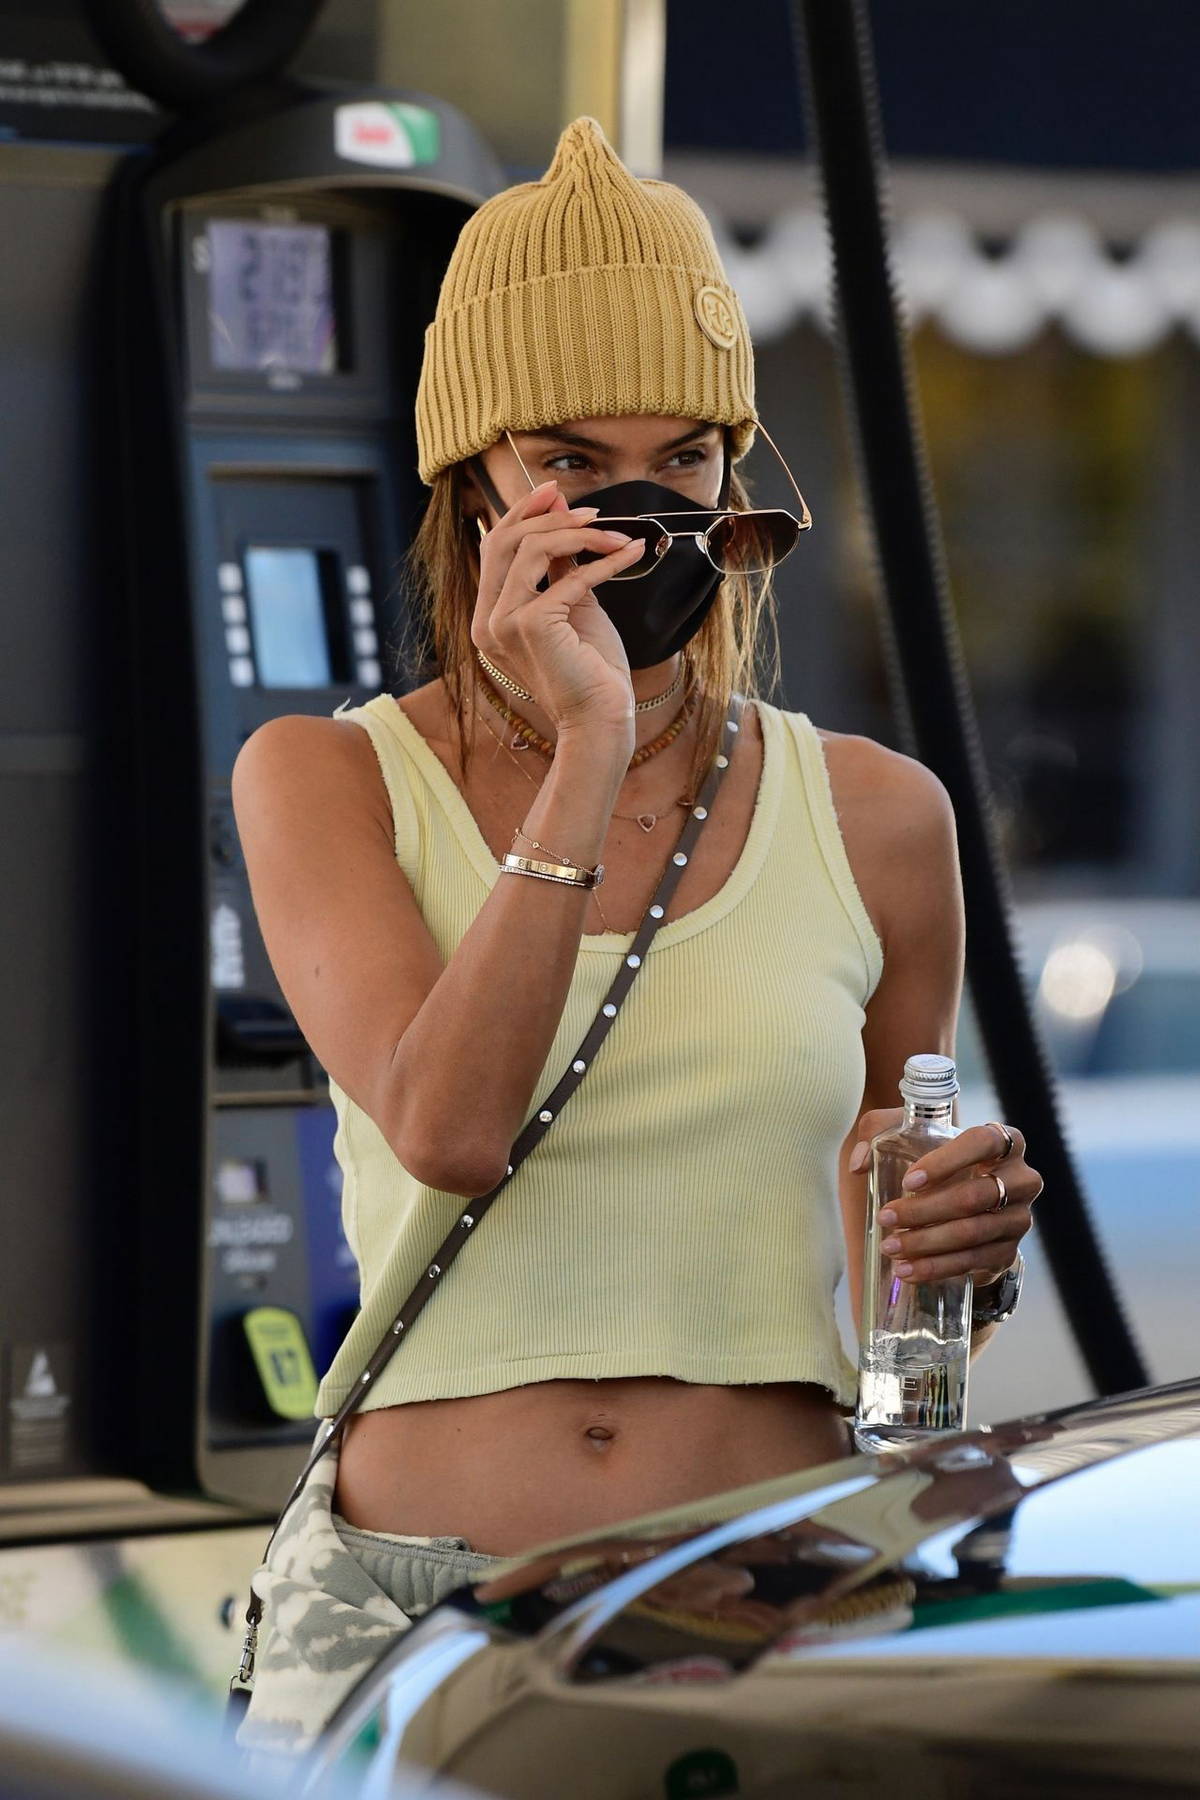 Alessandra Ambrosio shows a bit of her tummy in a crop top at Los Angeles  International Airport Featuring: Alessandra Ambrosio Where: Los Angeles,  California, United States When: 27 Sep 2017 Credit: WENN.com